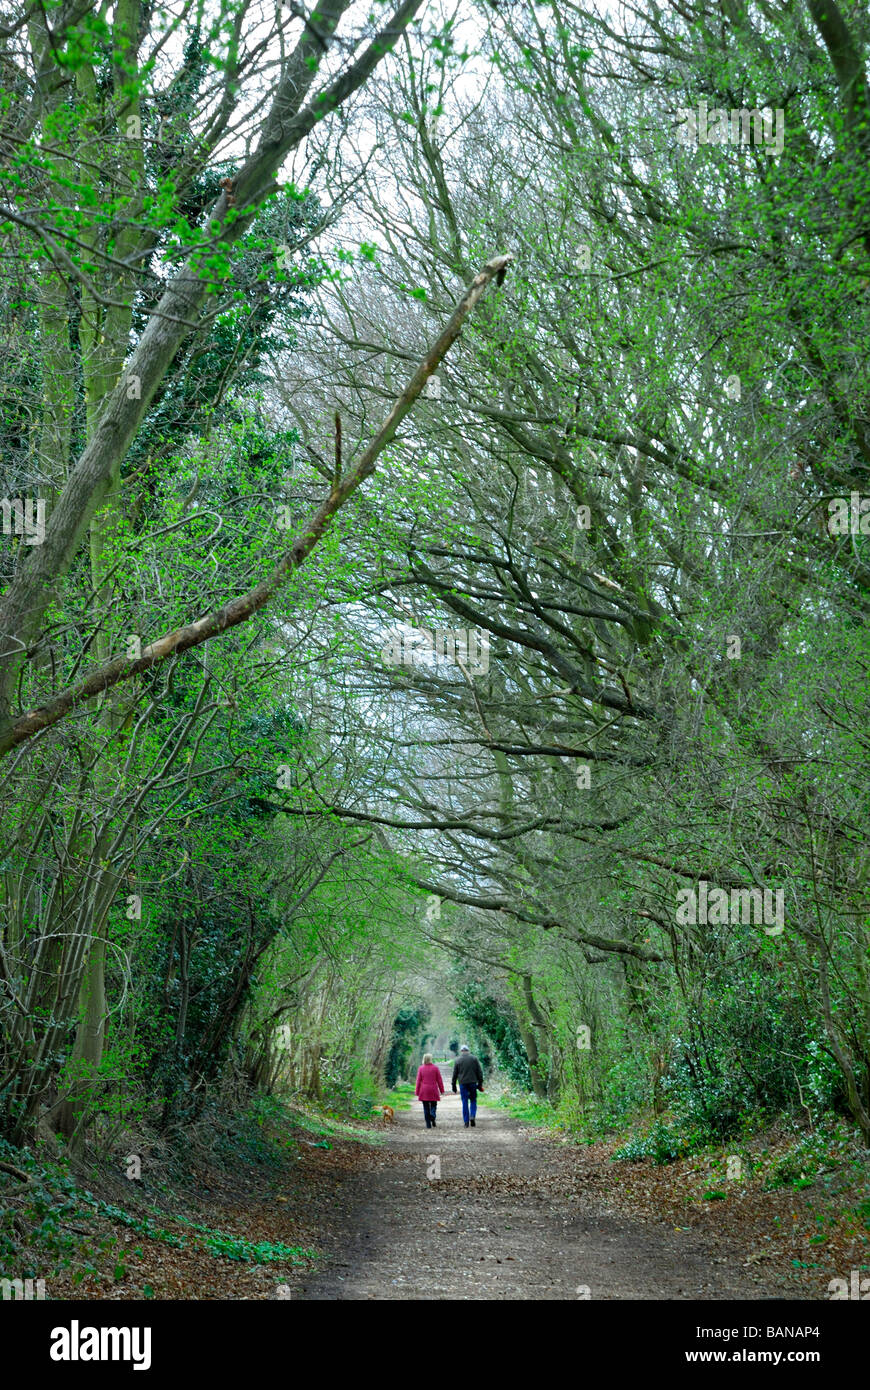 Two people walking along a country lane Nr Wheathampstead Hertfordshire UK Stock Photo